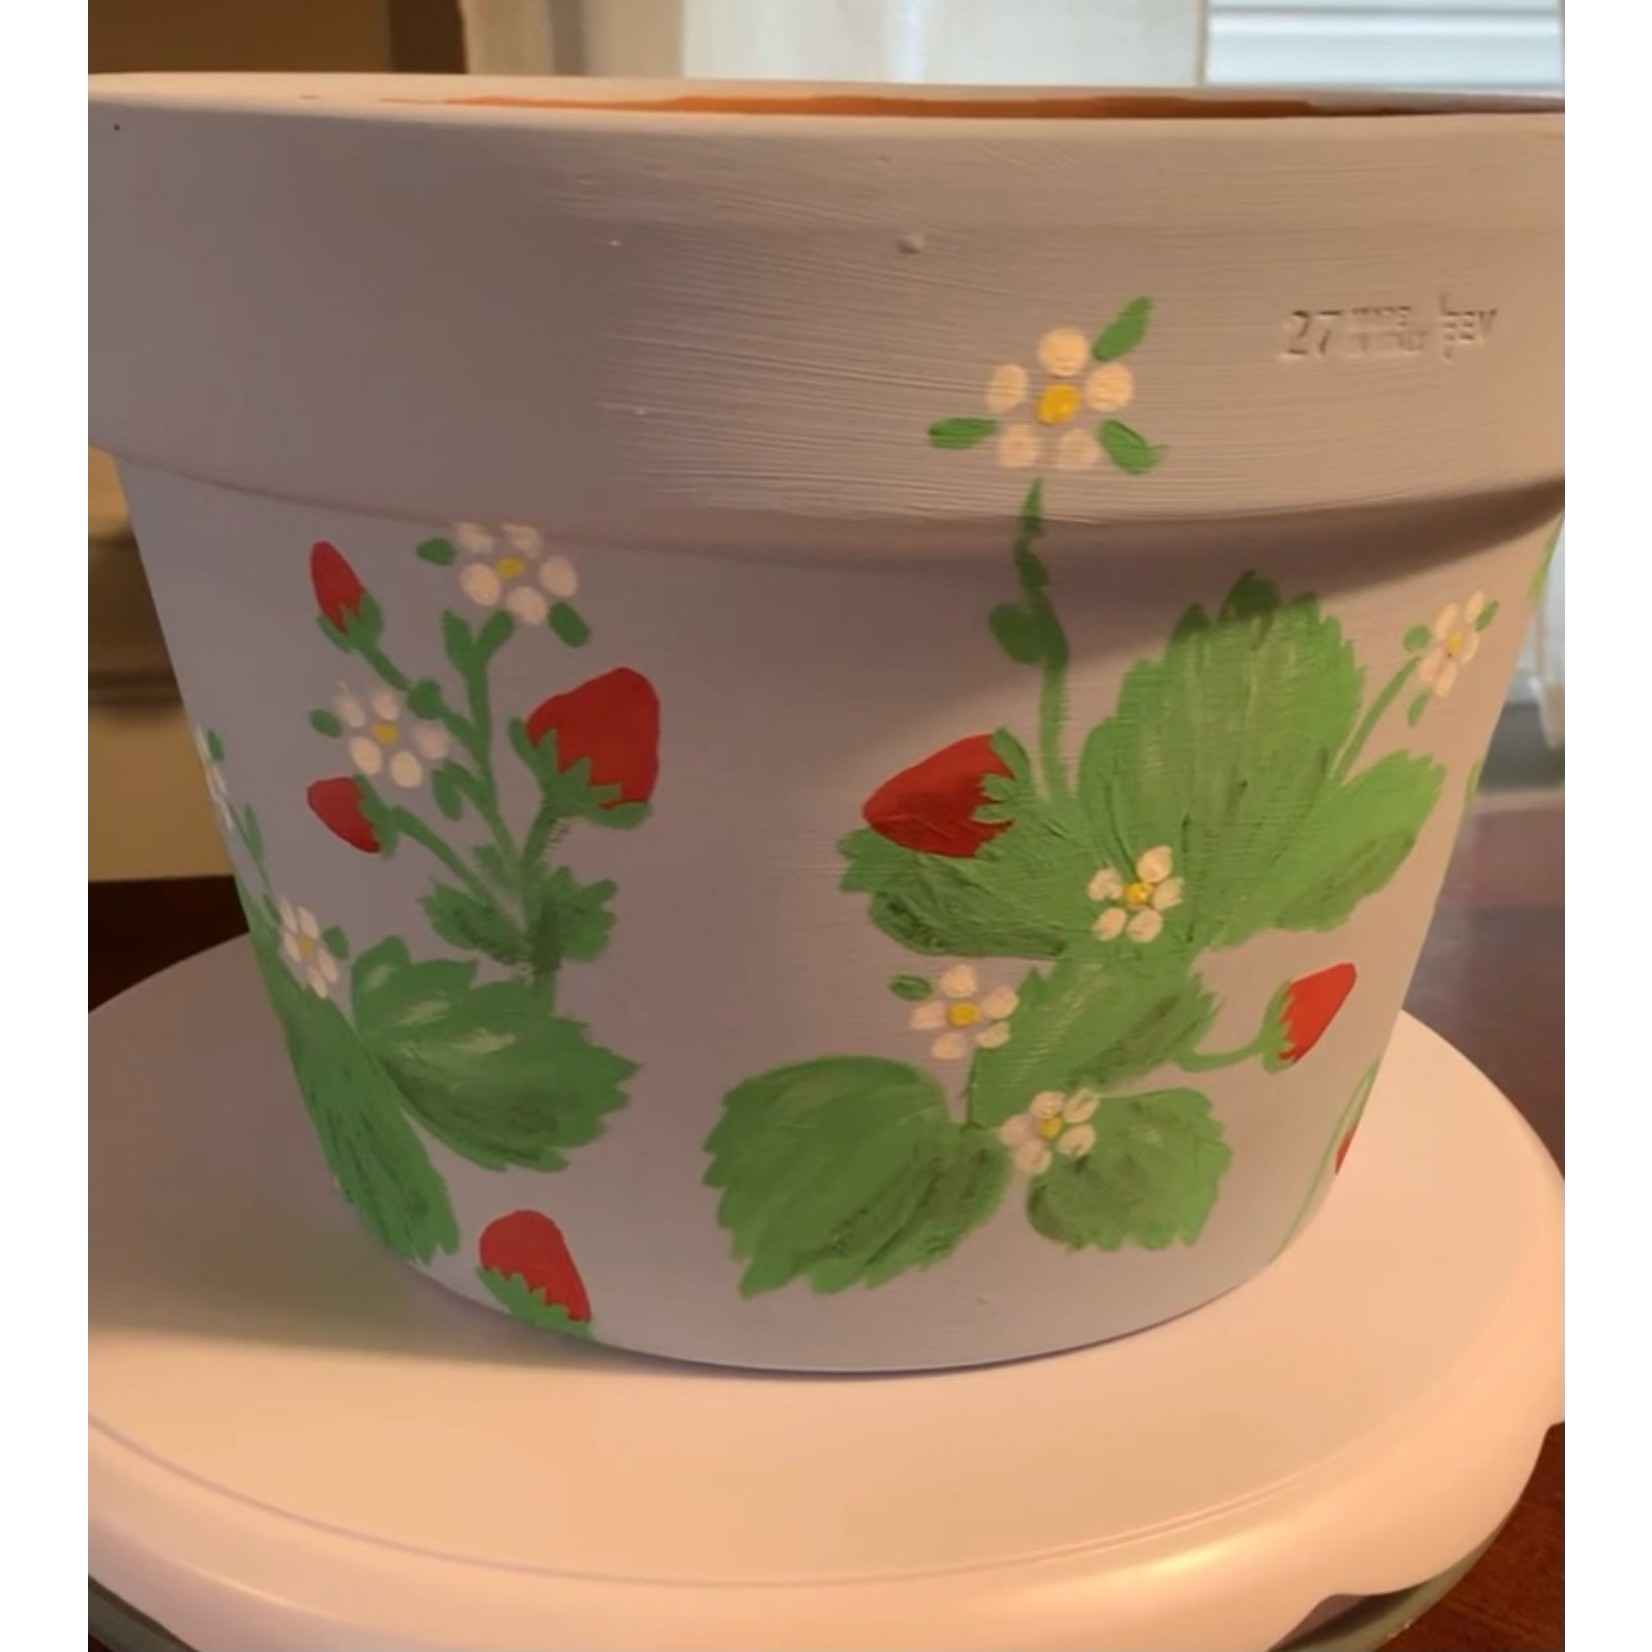 KKN Annie Sloan Painted "Make And Take" Flower Pot - Mar 31st 7:30-9:30pm